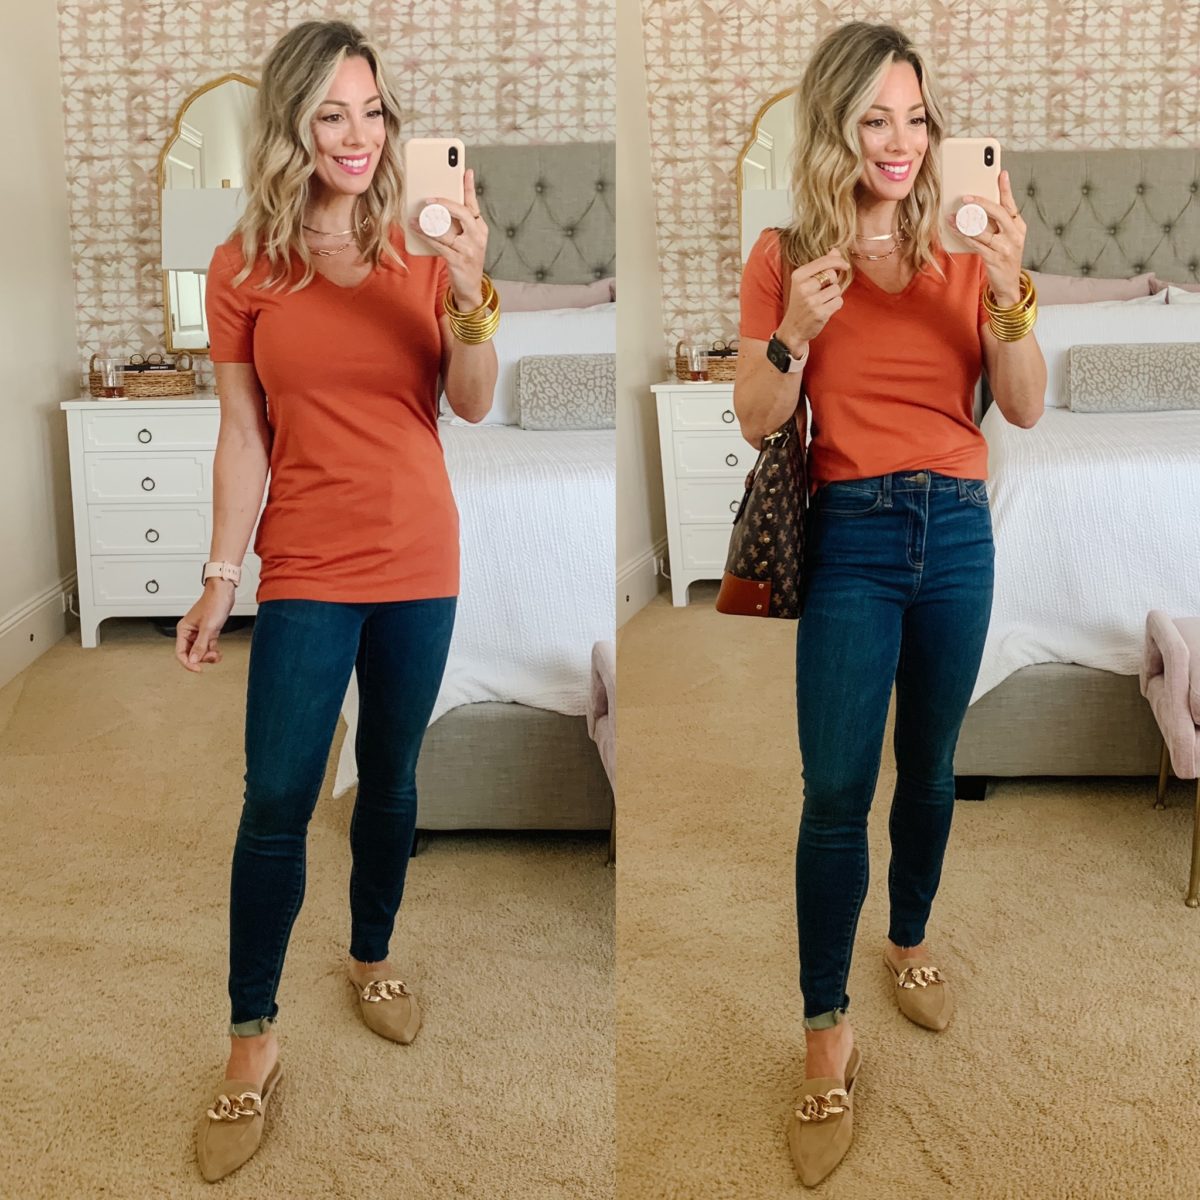 Amazon Fashion Faves, Tee and Jeans with Mules